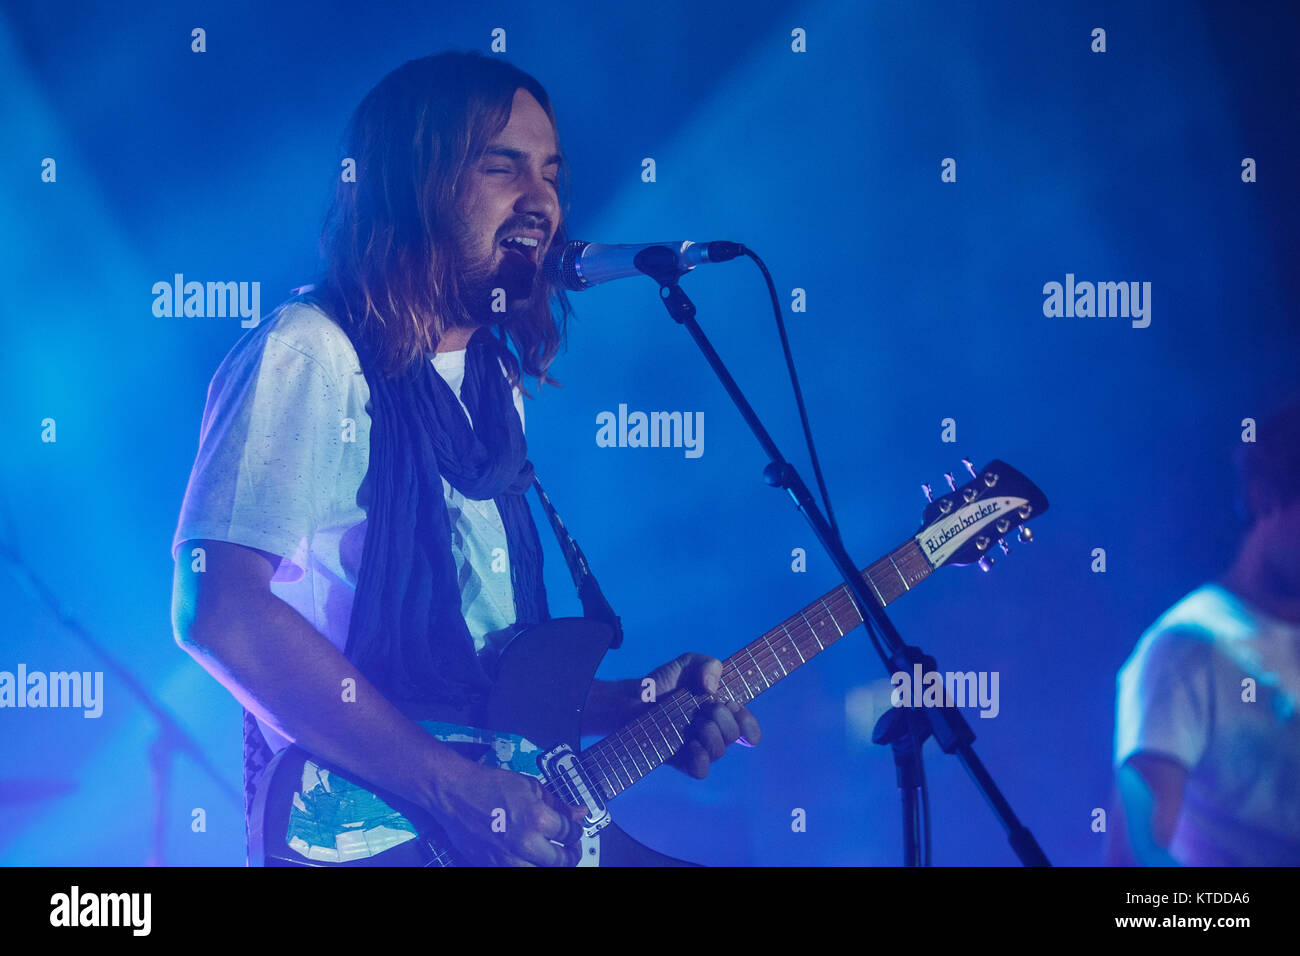 The Australian musical project Tame Impala performs a live concert at Falconer Salen in Copenhagen. Here guitarist and musician Kevin Parker is seen live on stage. Denmark, 03/02 2016. Stock Photo